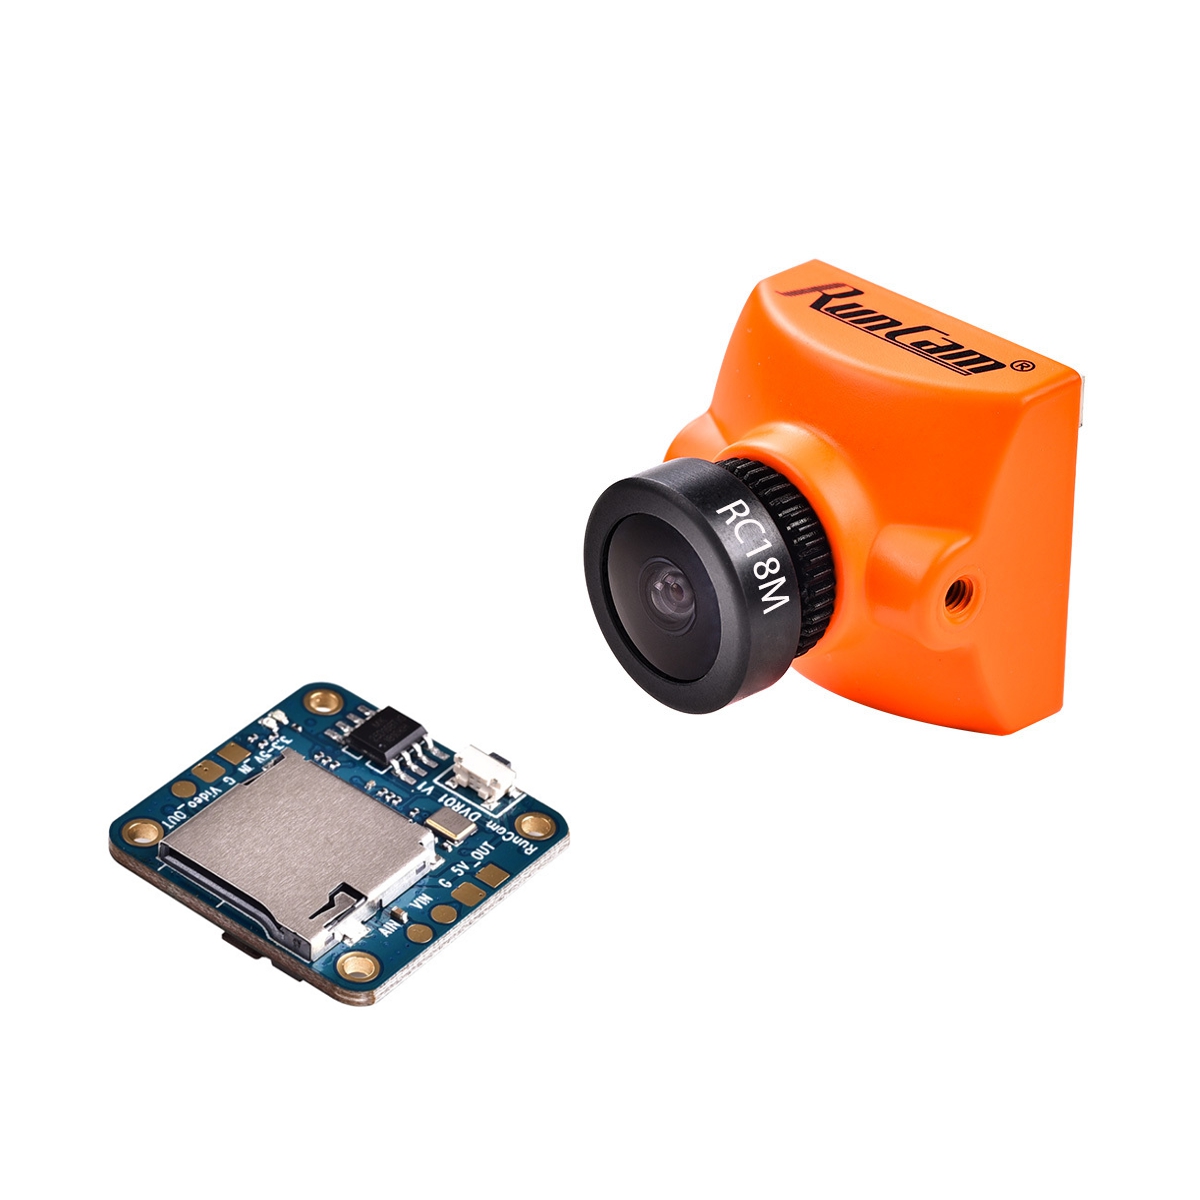 

RunCam Racer 2 + Mini DVR Remote Control Super WDR CMOS 700TVL 1.8mm/2.1mm fpv Camera 6ms Low Latancy OSD With Selector Switch